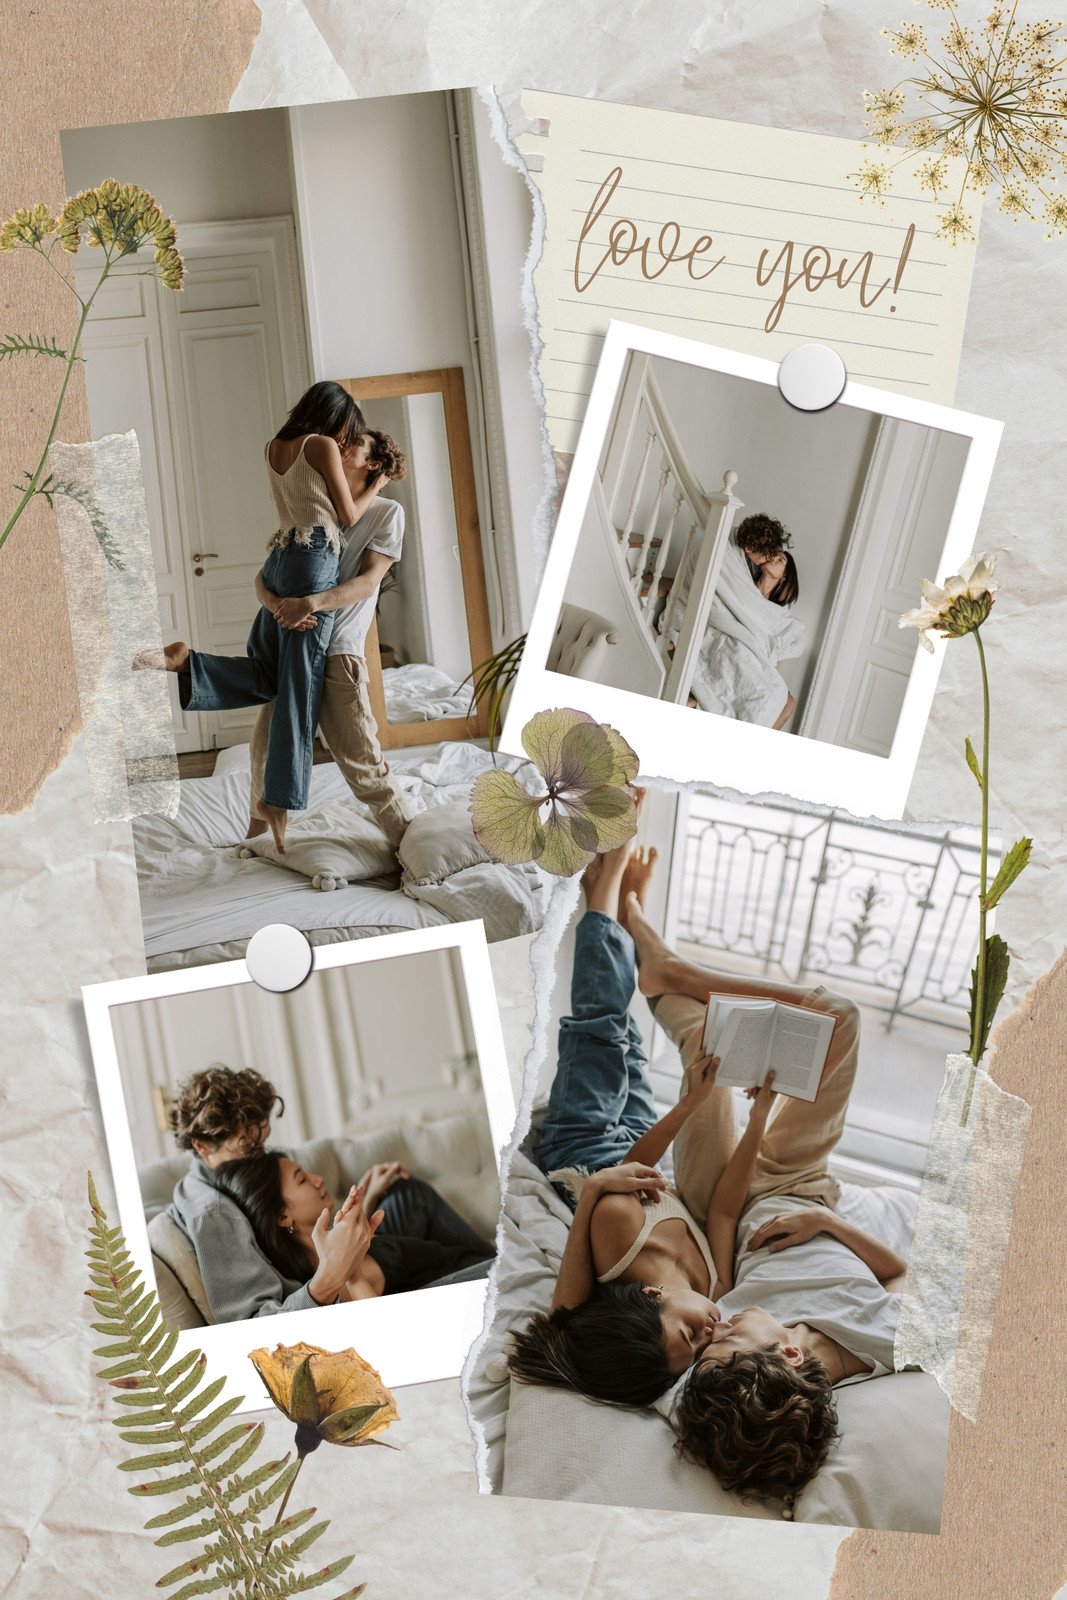 https://marketplace.canva.com/EAFK6IgxFTg/1/0/1067w/canva-brown-gray-green-creative-floral-beautiful-love-photo-collage-9bEgwlFR9QU.jpg